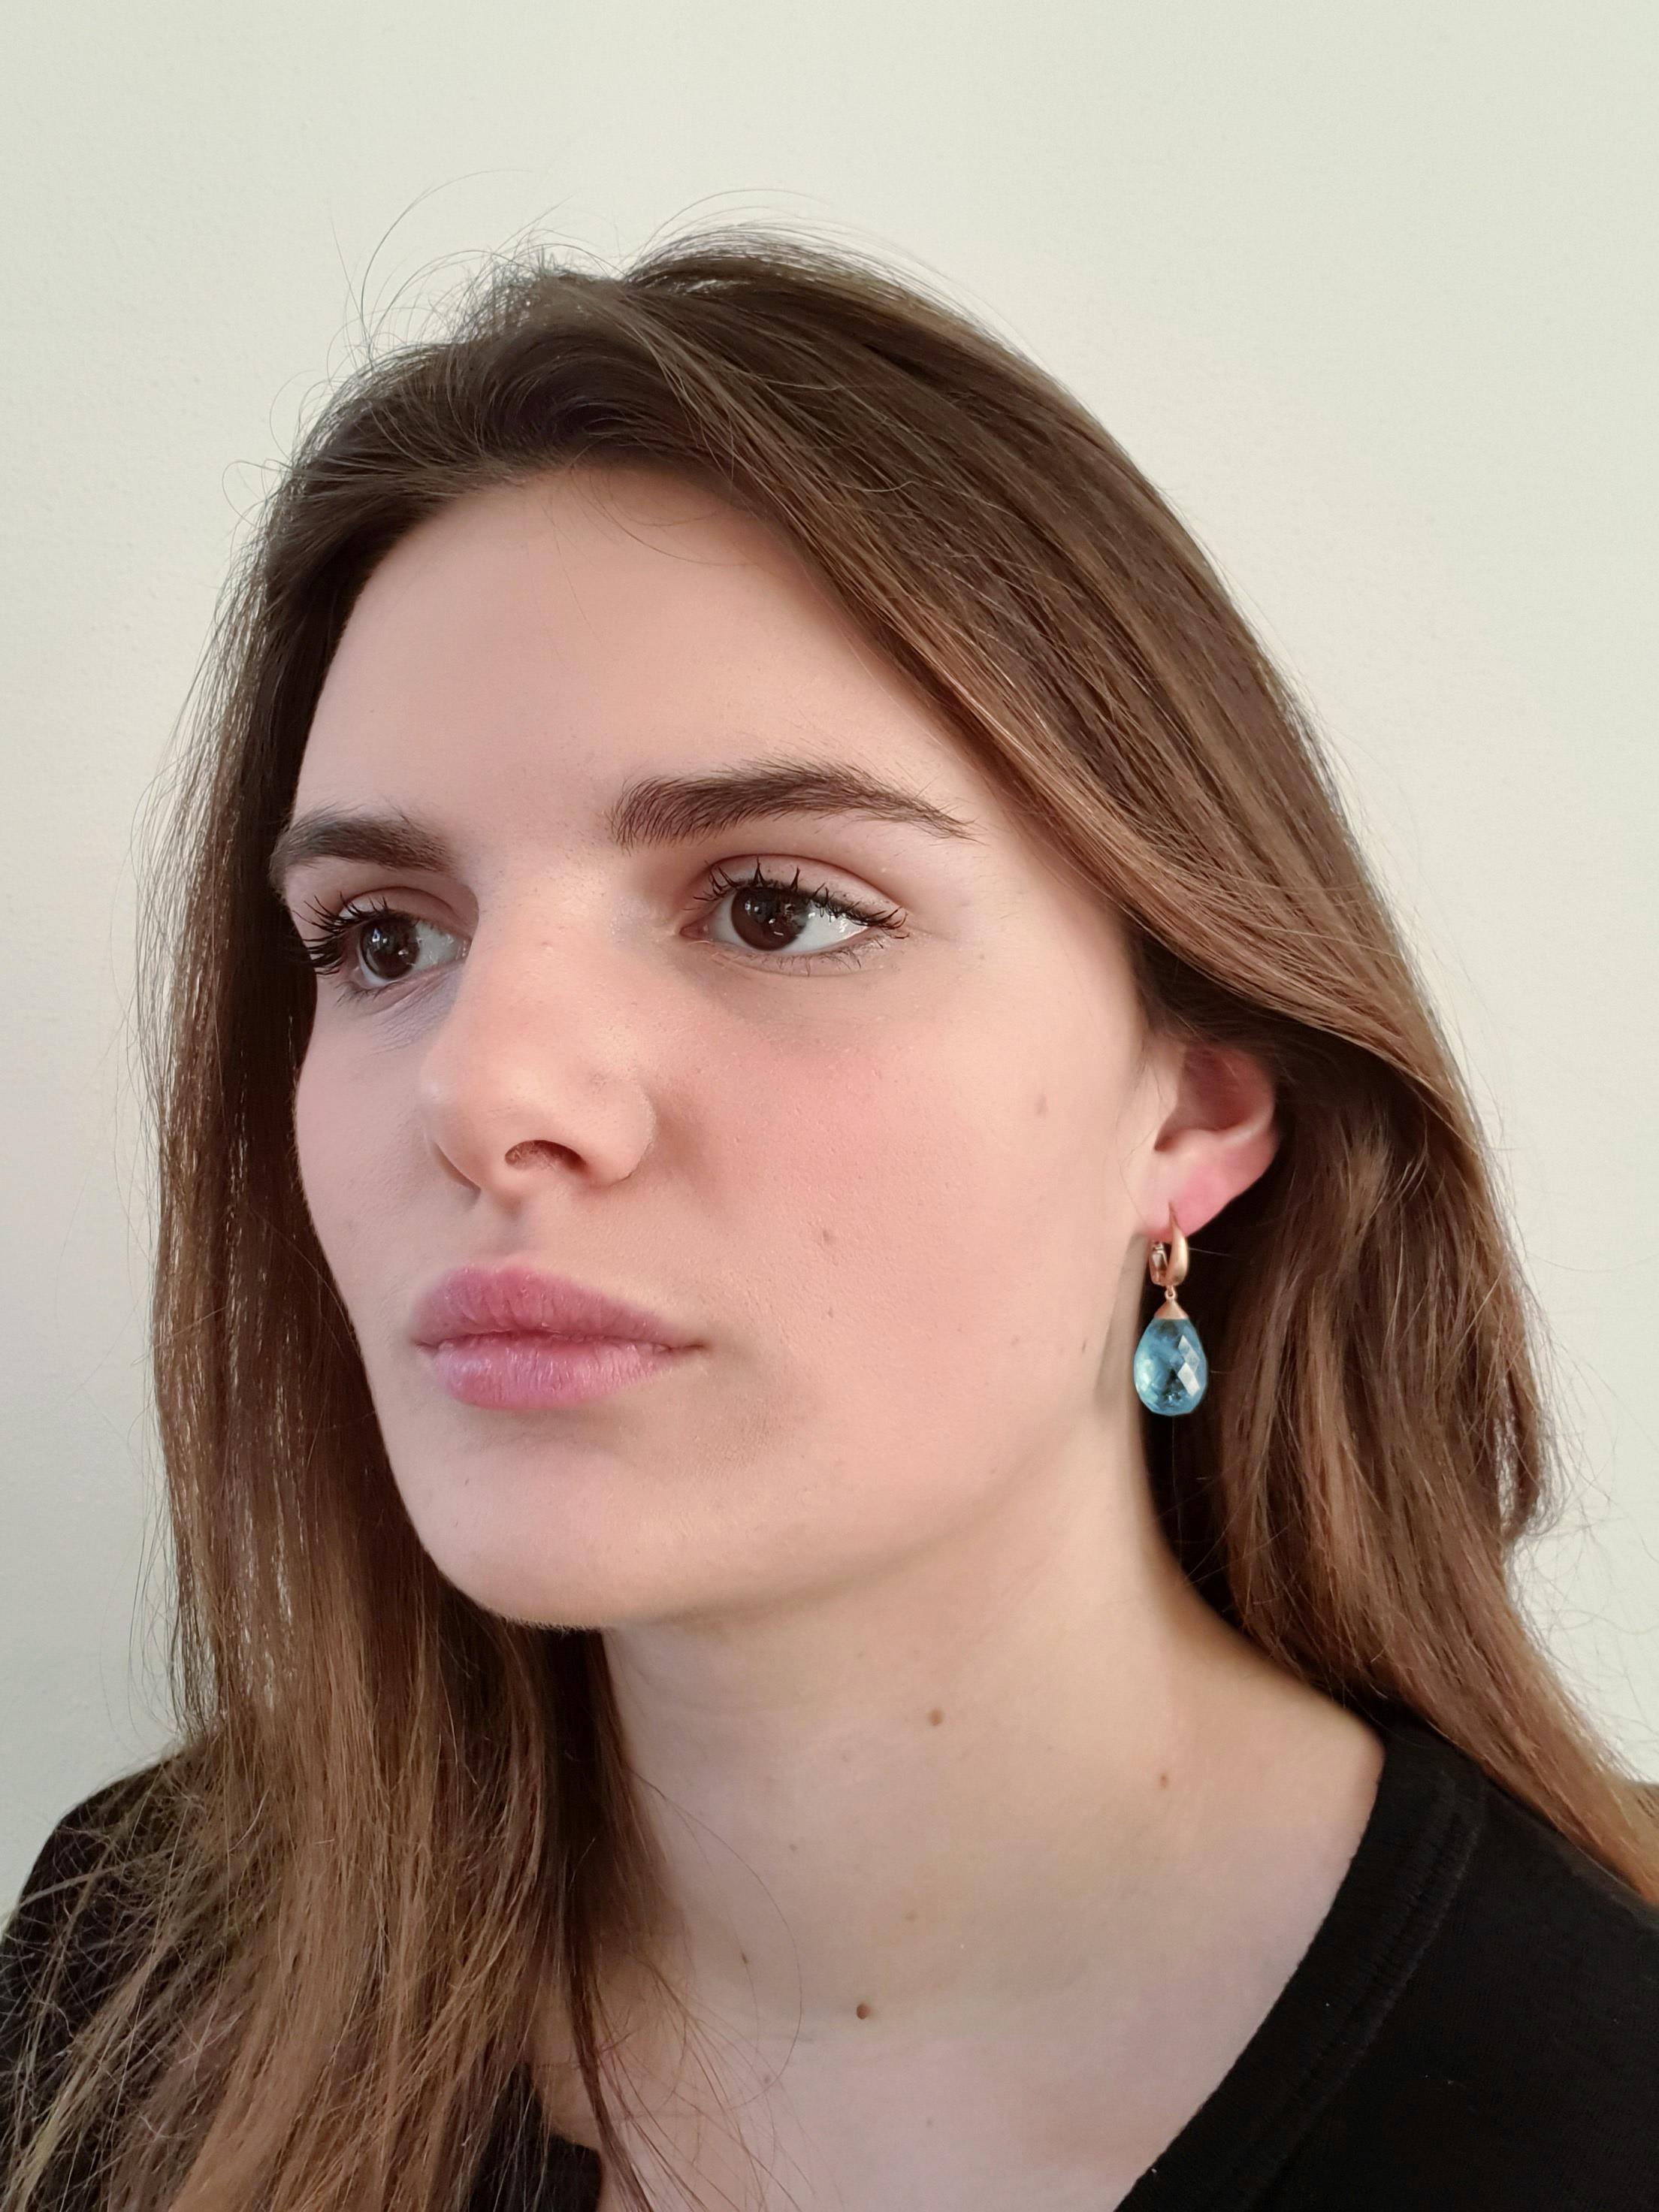 Dalben design 18 kt satin finished rose gold earrings with two drop shape Aquamarine 12,4 x 18 mm weight 25,6 carat . 
Earring dimension : 
width 12,4 mm 
height with leverback 34,4 mm 
The earrings has been designed and handcrafted in our atelier